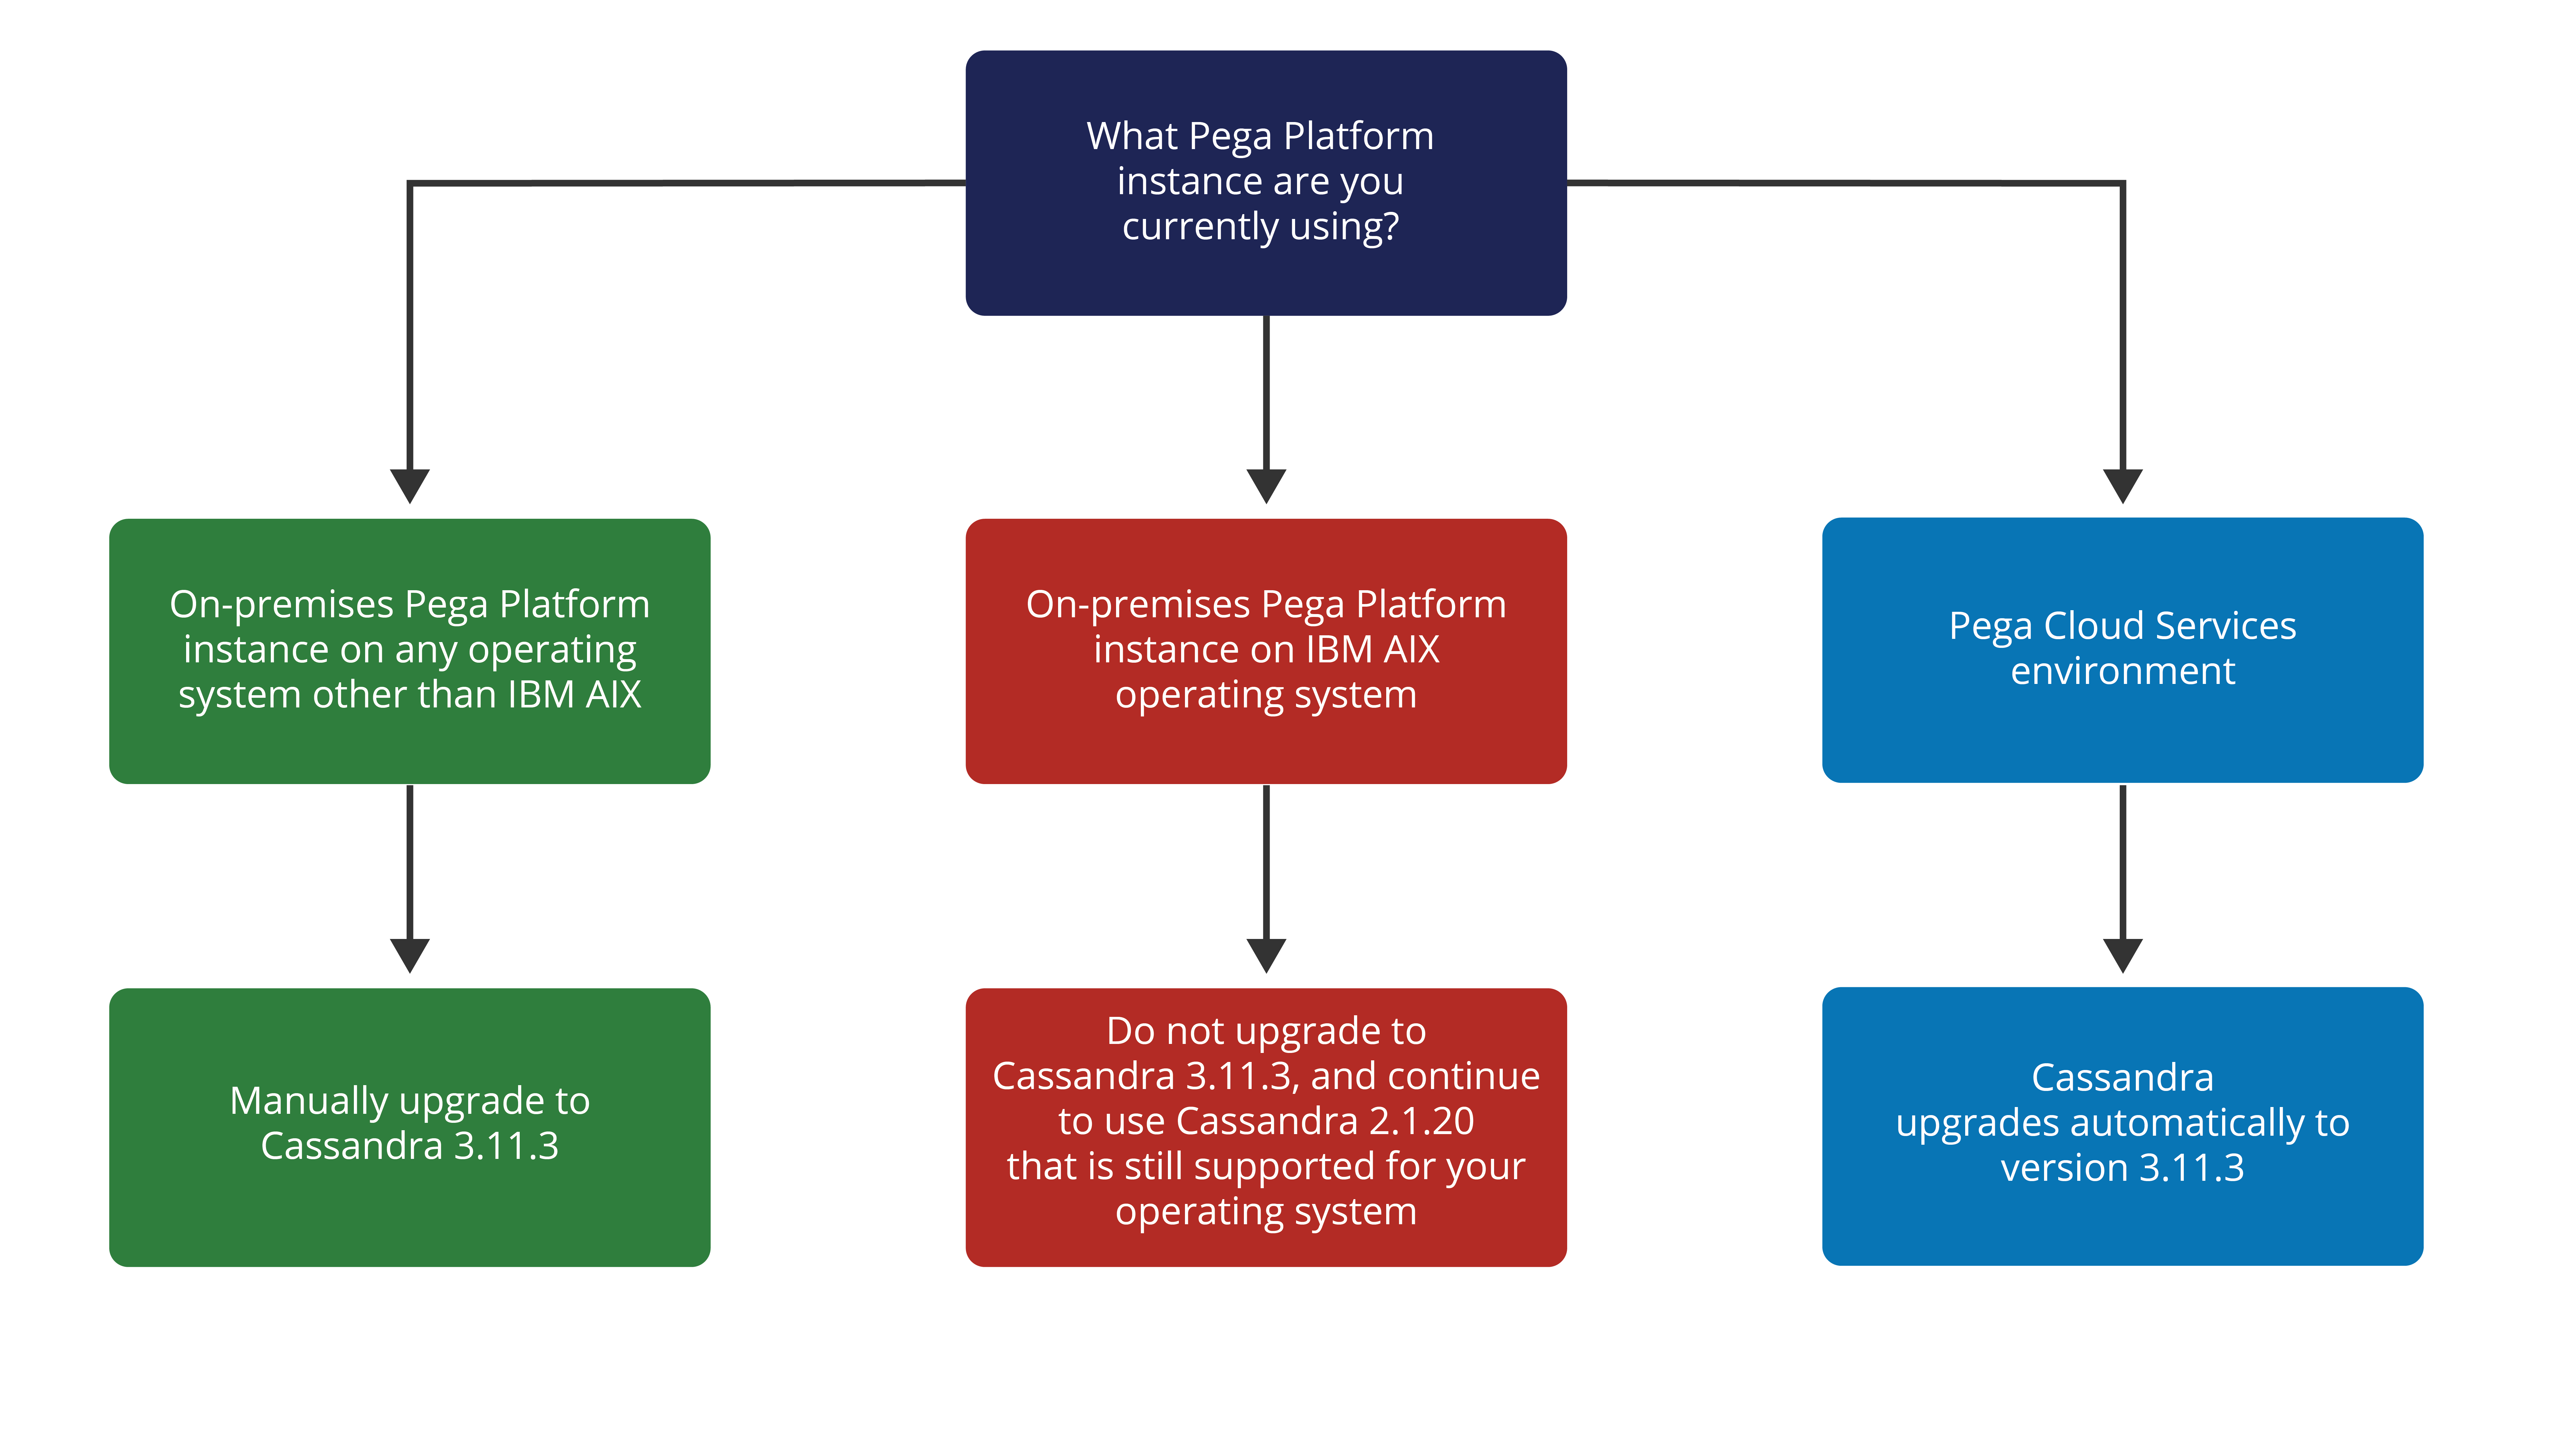 Diagram showing what steps to take to upgrade to Cassandra 3.11.3 depending on your Pega Platform instance